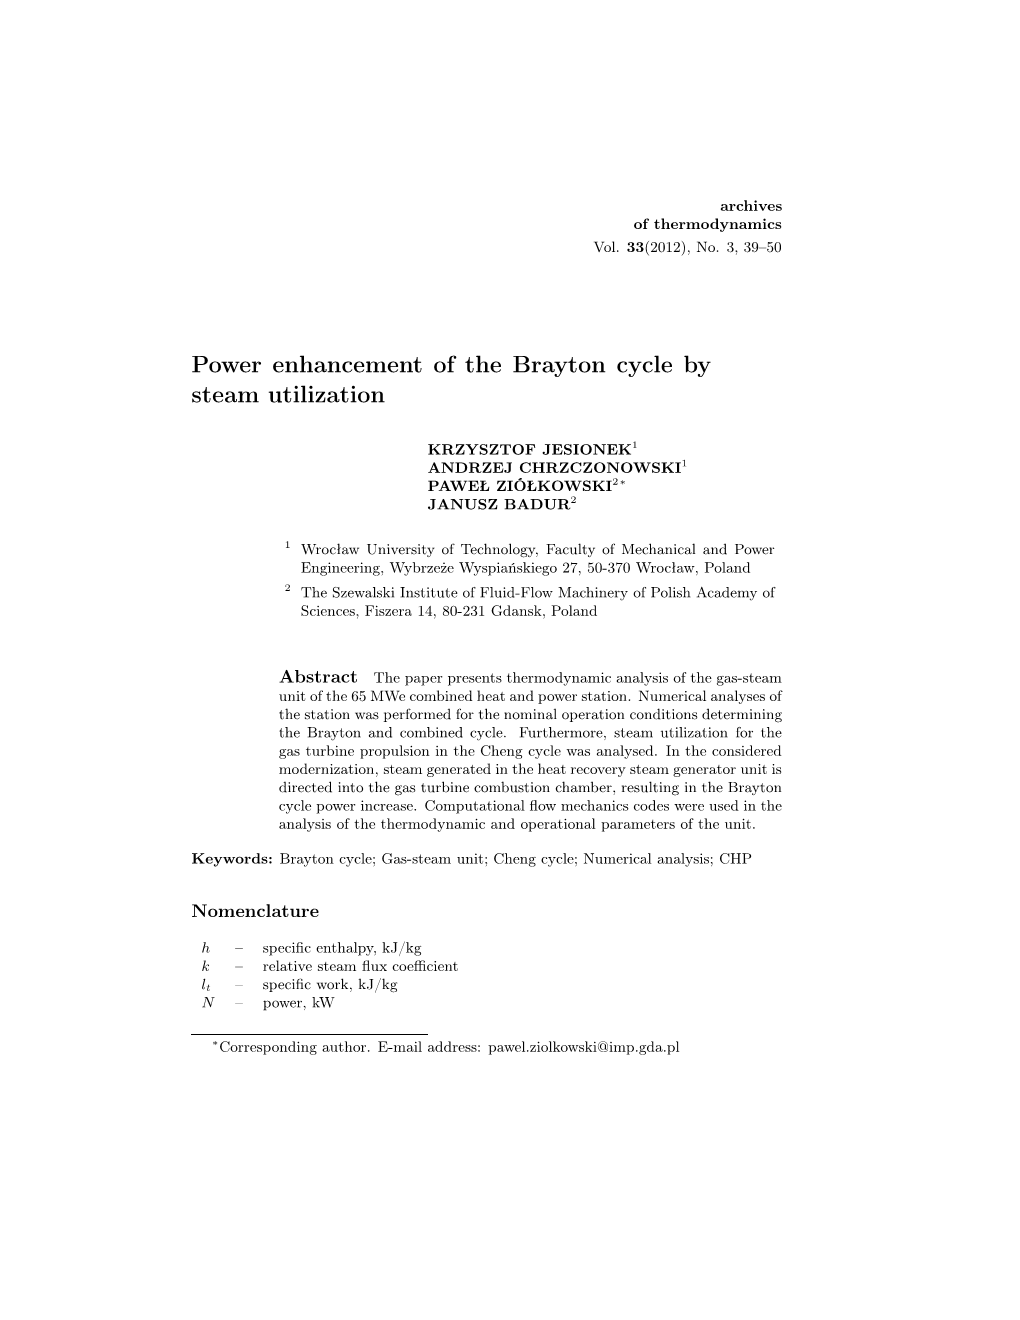 Power Enhancement of the Brayton Cycle by Steam Utilization